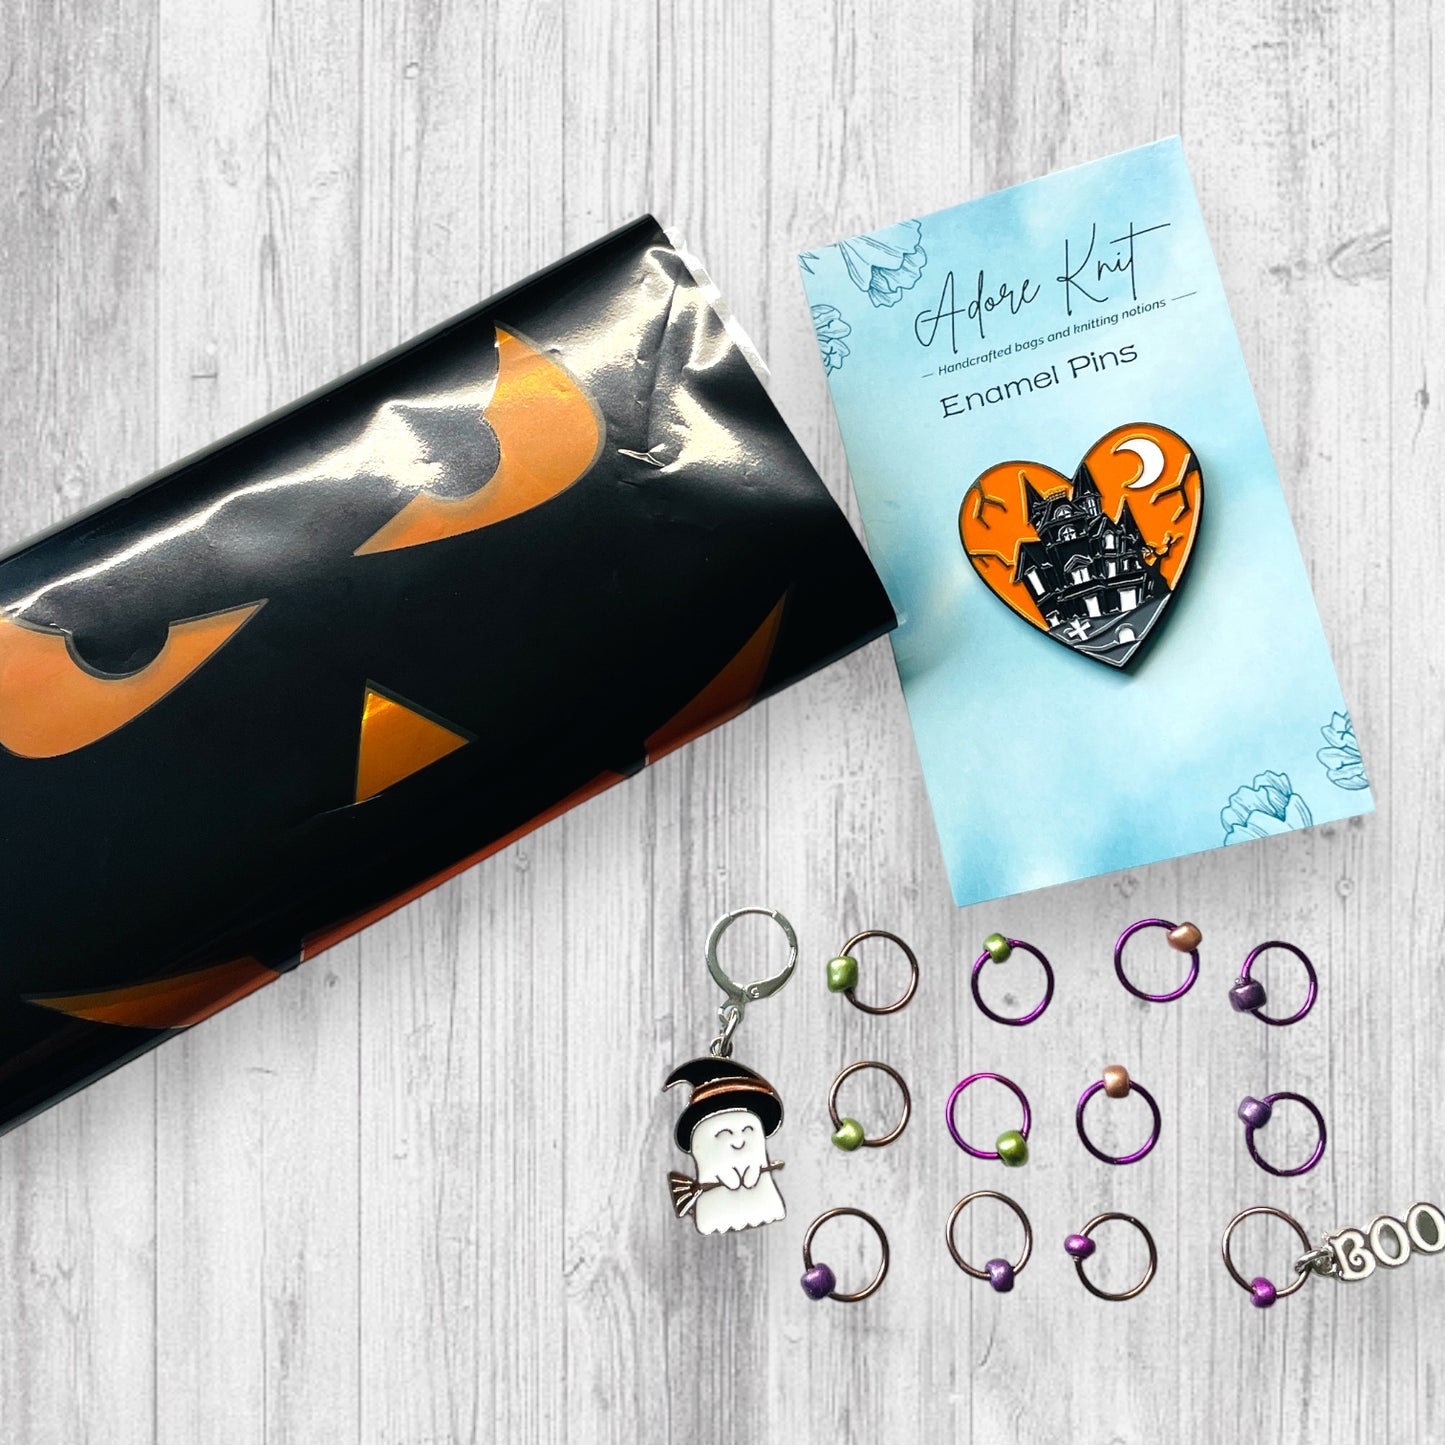 2024 13 Days of Halloween Countdown Club, 13 Days of Progress & Stitch Markers with a Project Bag and a Skein of Yarn - AdoreKnit